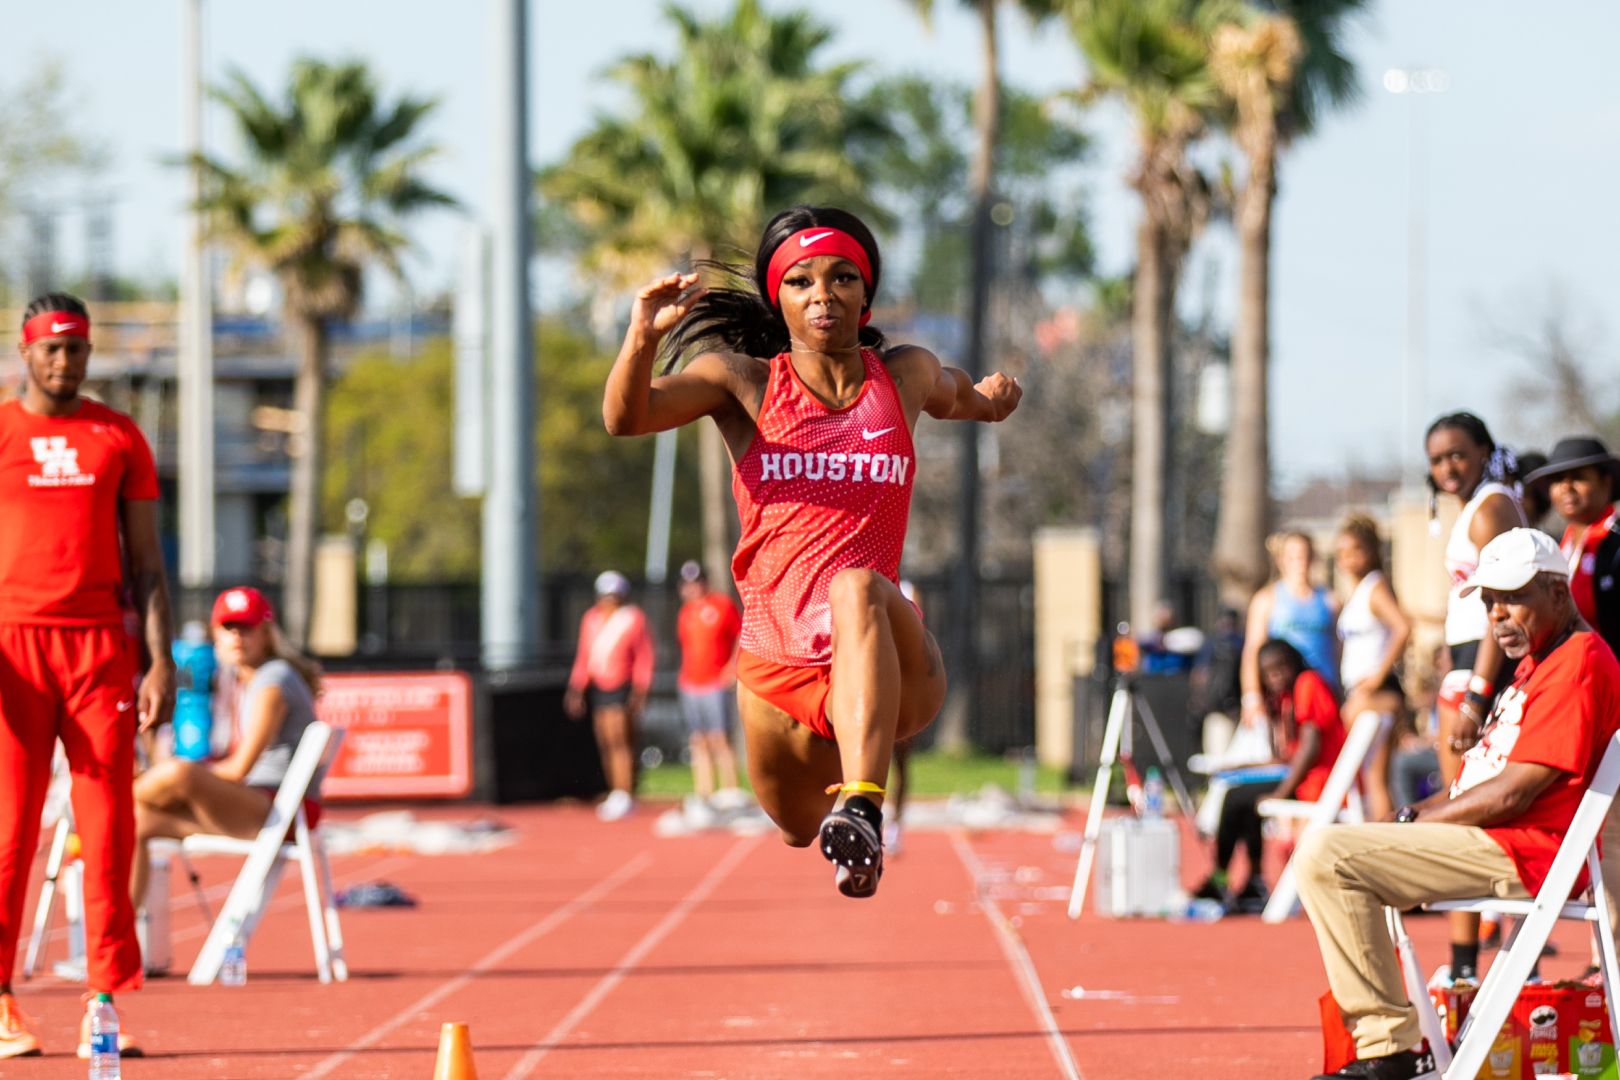 Destiny Lawrence broke the UH track and field program record in the women’s triple jump with a jump of 13.61 meters on Saturday at the Houston Alumni Invitational. | Courtesy of UH athletics